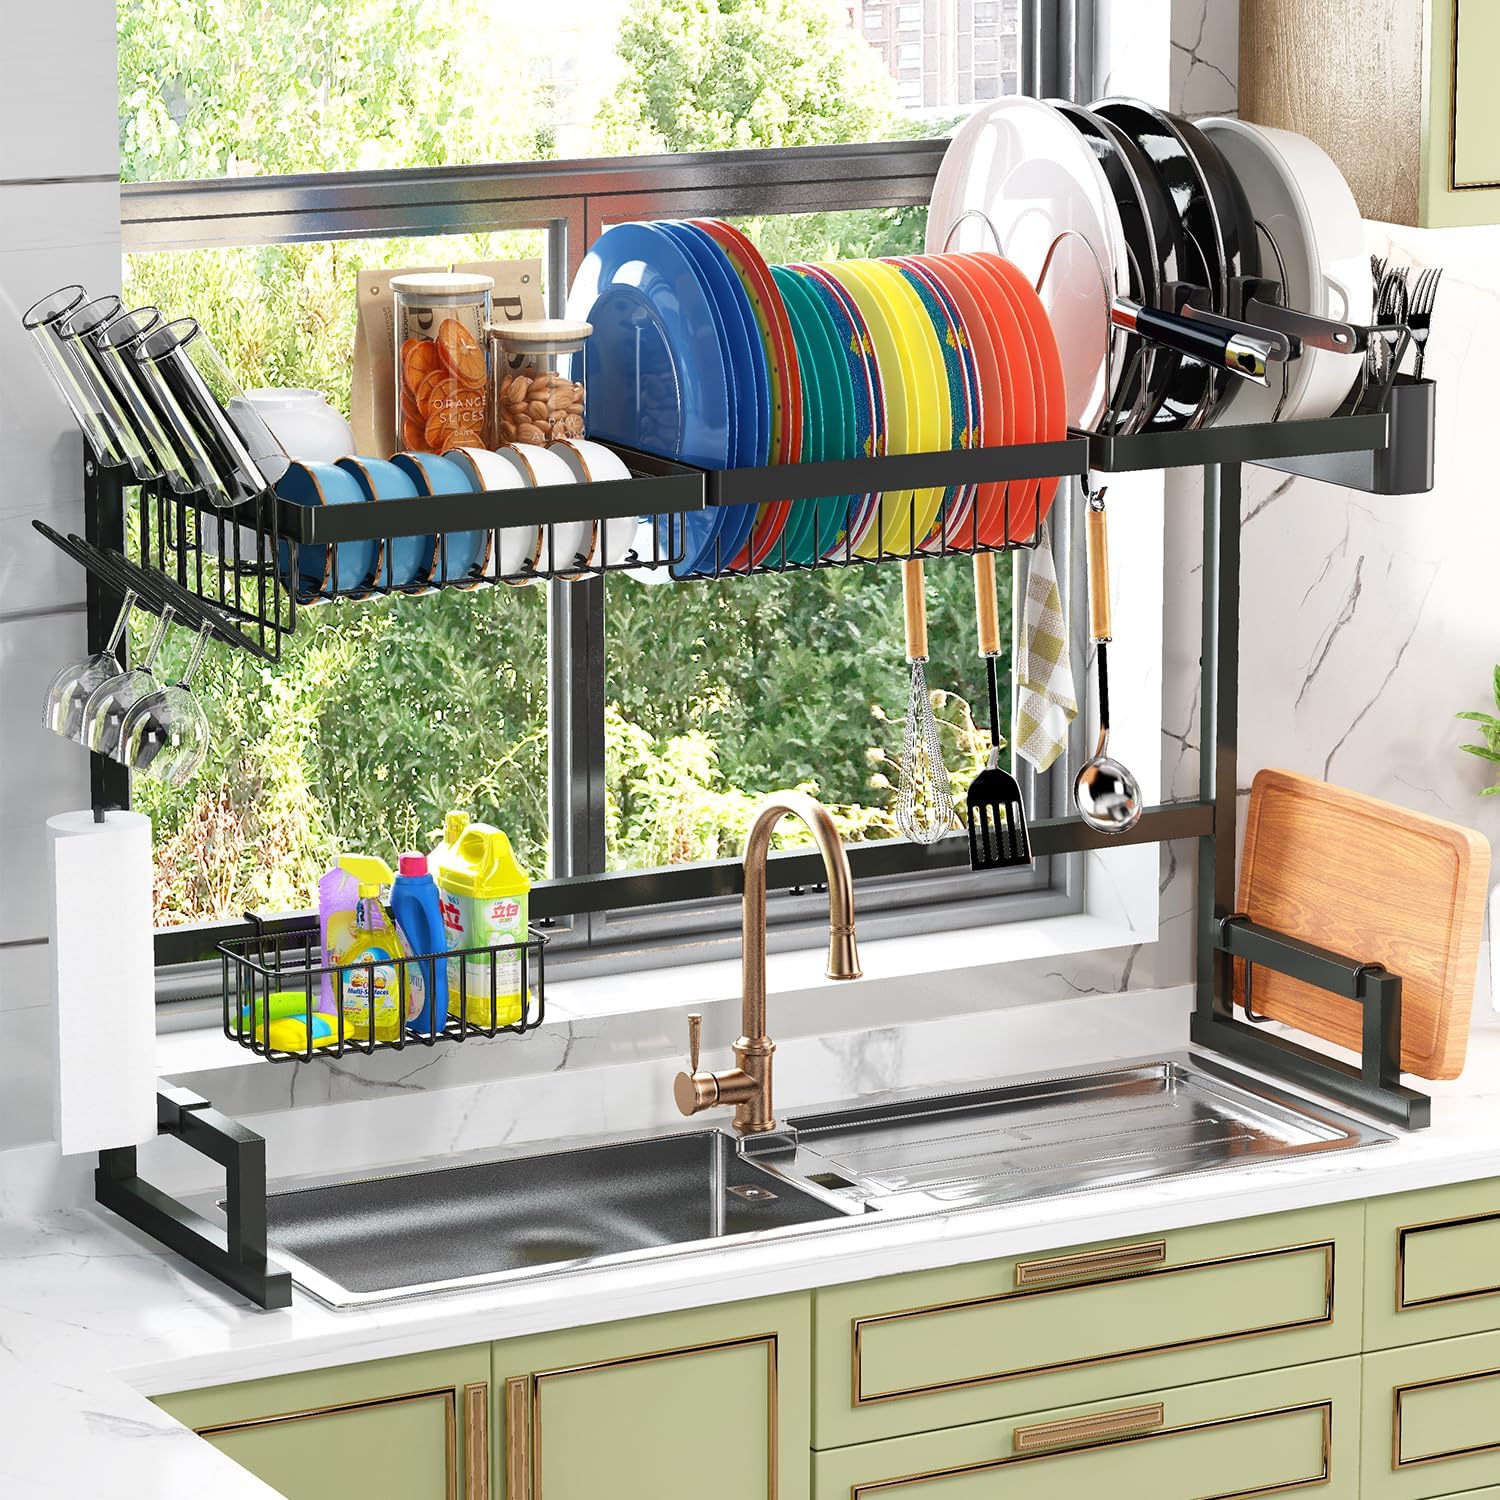 ADBIU Over The Sink (24- 32.5 L) Dish Drying Rack (Expandable Dimension)  Snap-On Design 2 Tier Kitchen Large Dish Drainer Stainless Steel Counter